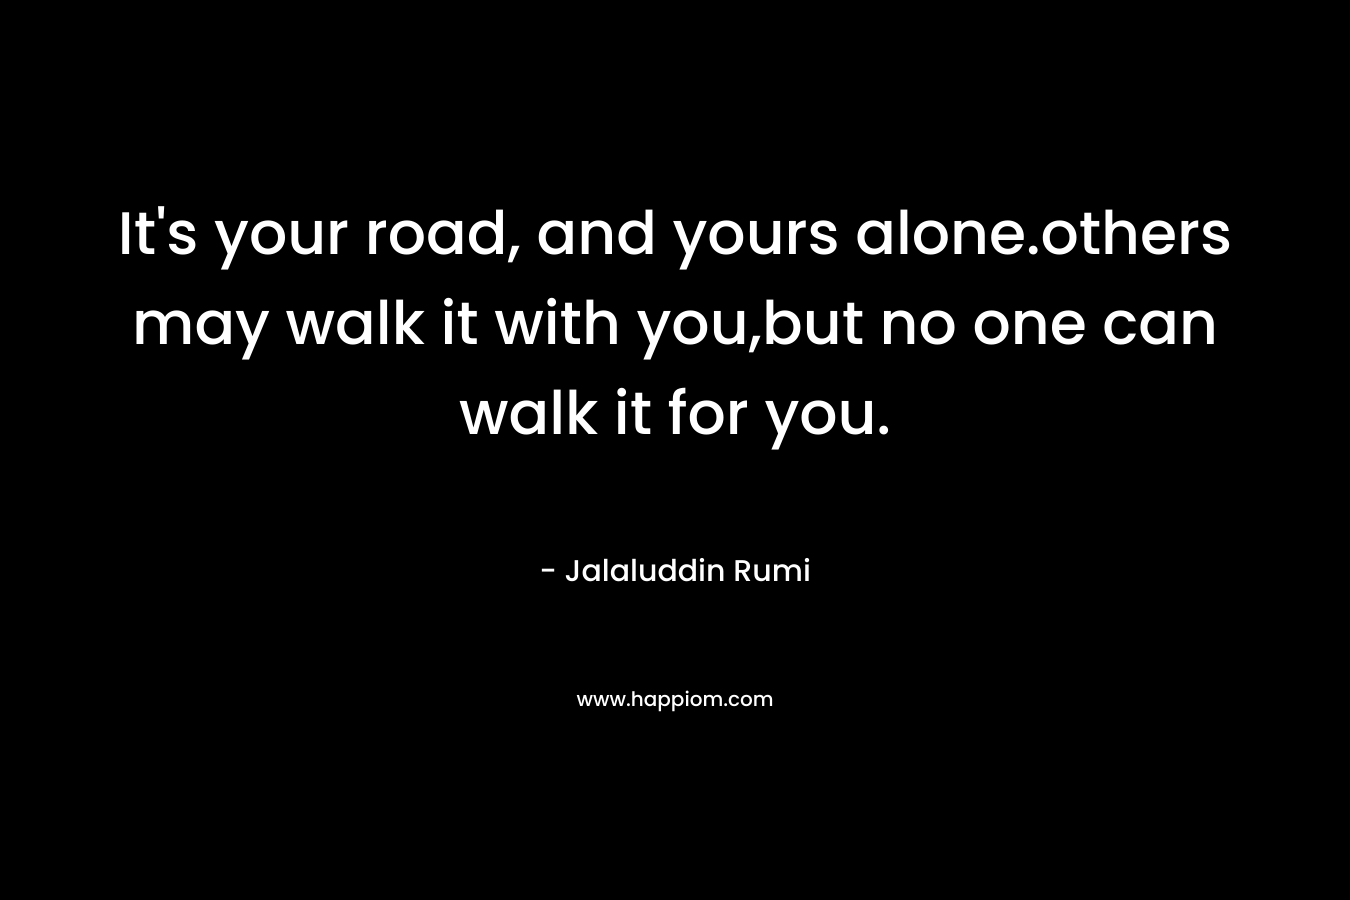 It's your road, and yours alone.others may walk it with you,but no one can walk it for you.